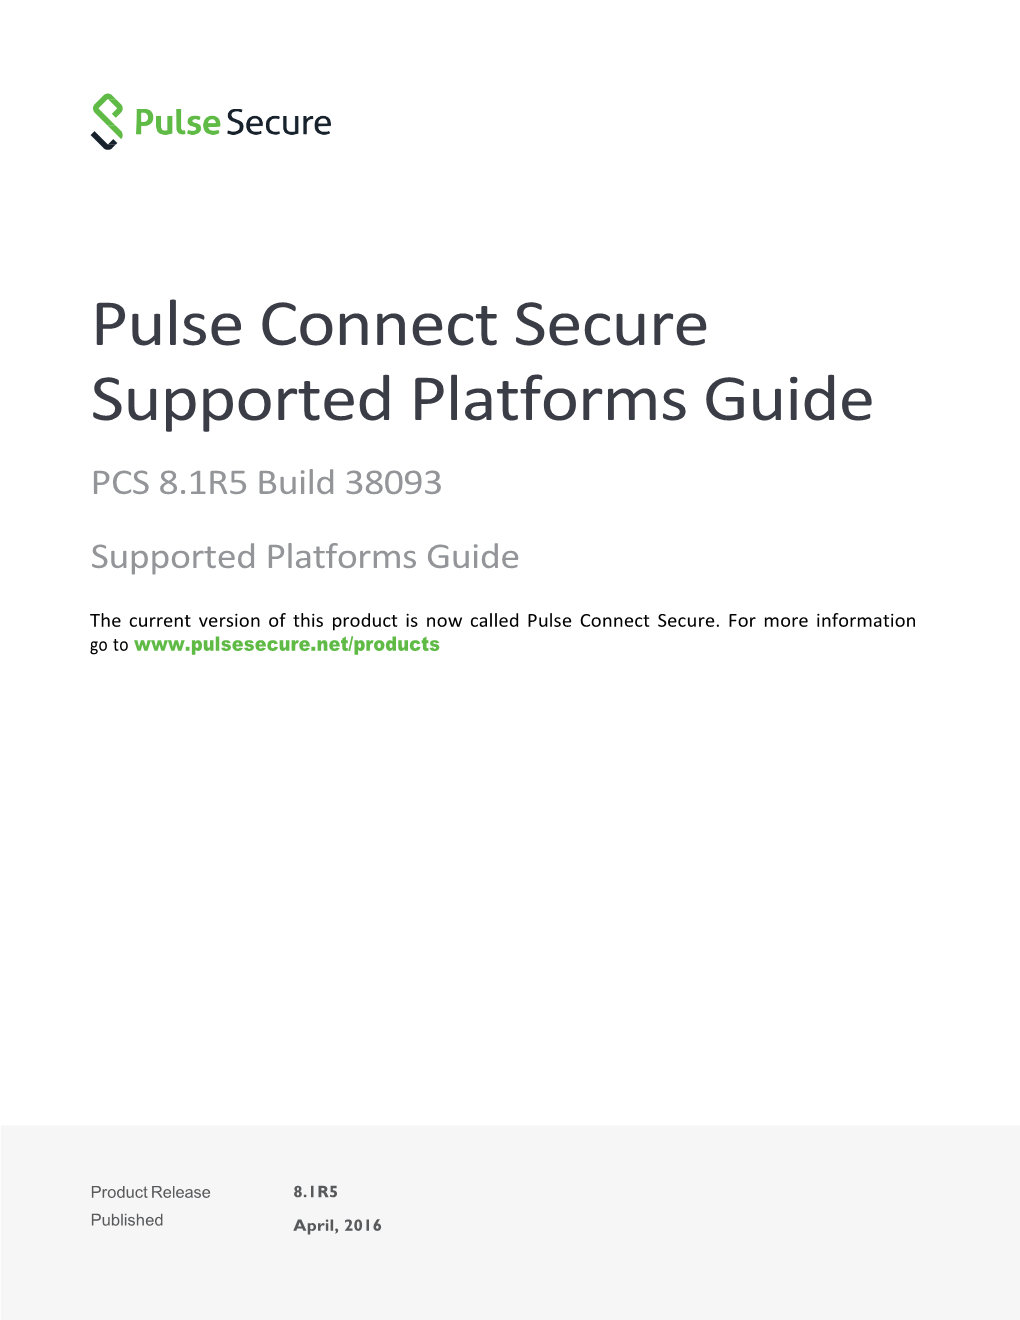 Pulse Connect Secure Supported Platforms Guide PCS 8.1R5 Build 38093